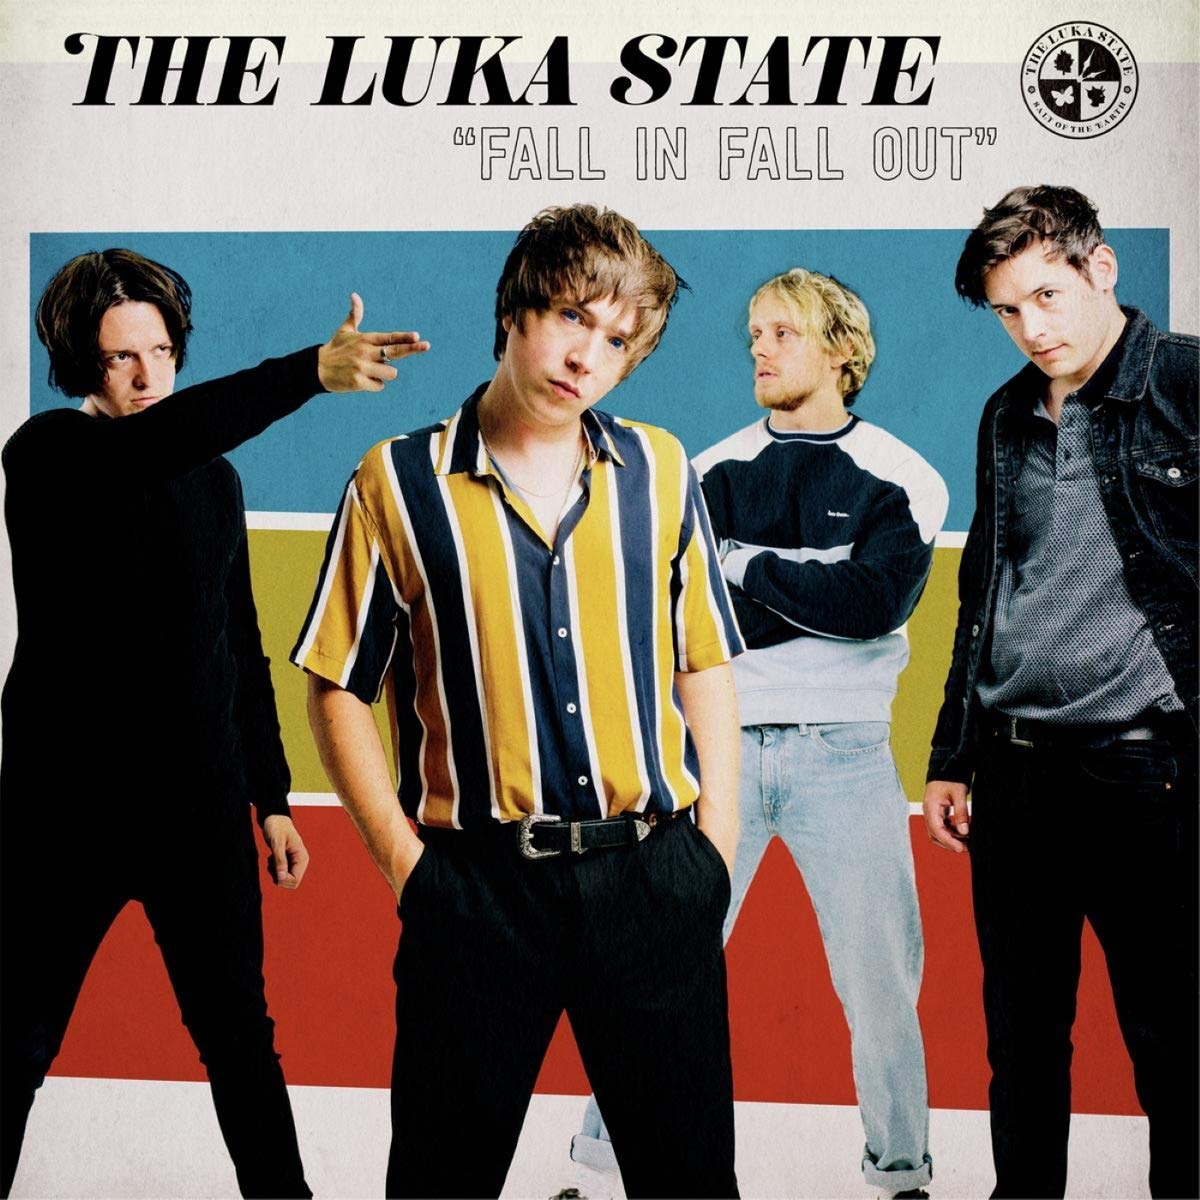 The Luka State-Fall In Fall Out-CD-FLAC-2020-BOCKSCAR Download